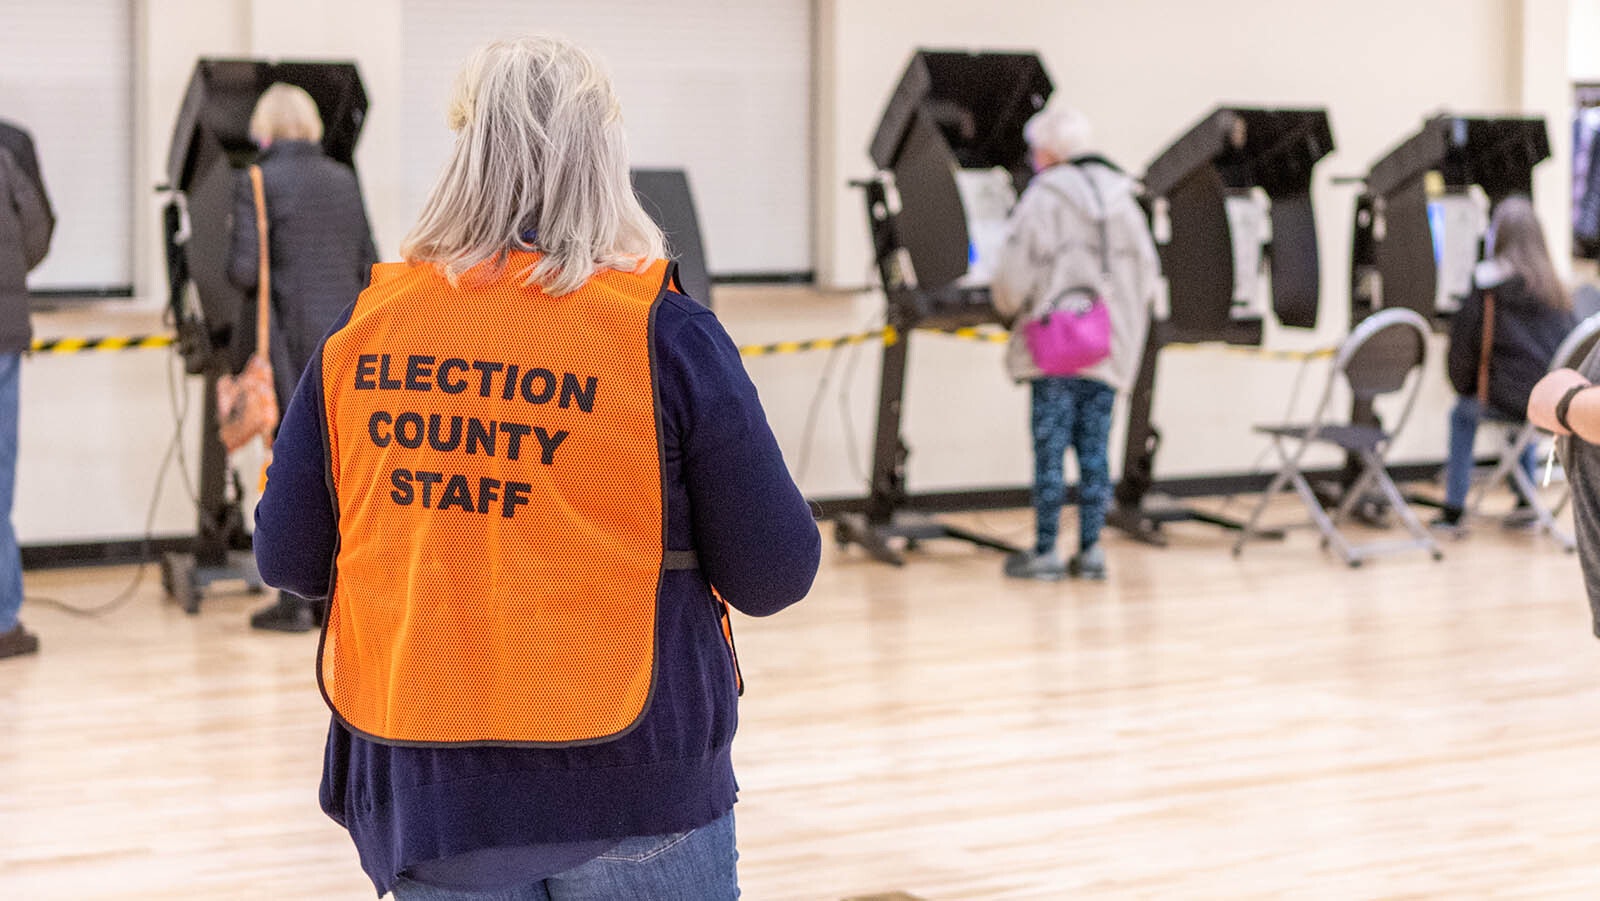 A Laramie County election worker monitors voting in Cheyenne during the 2022 general election.